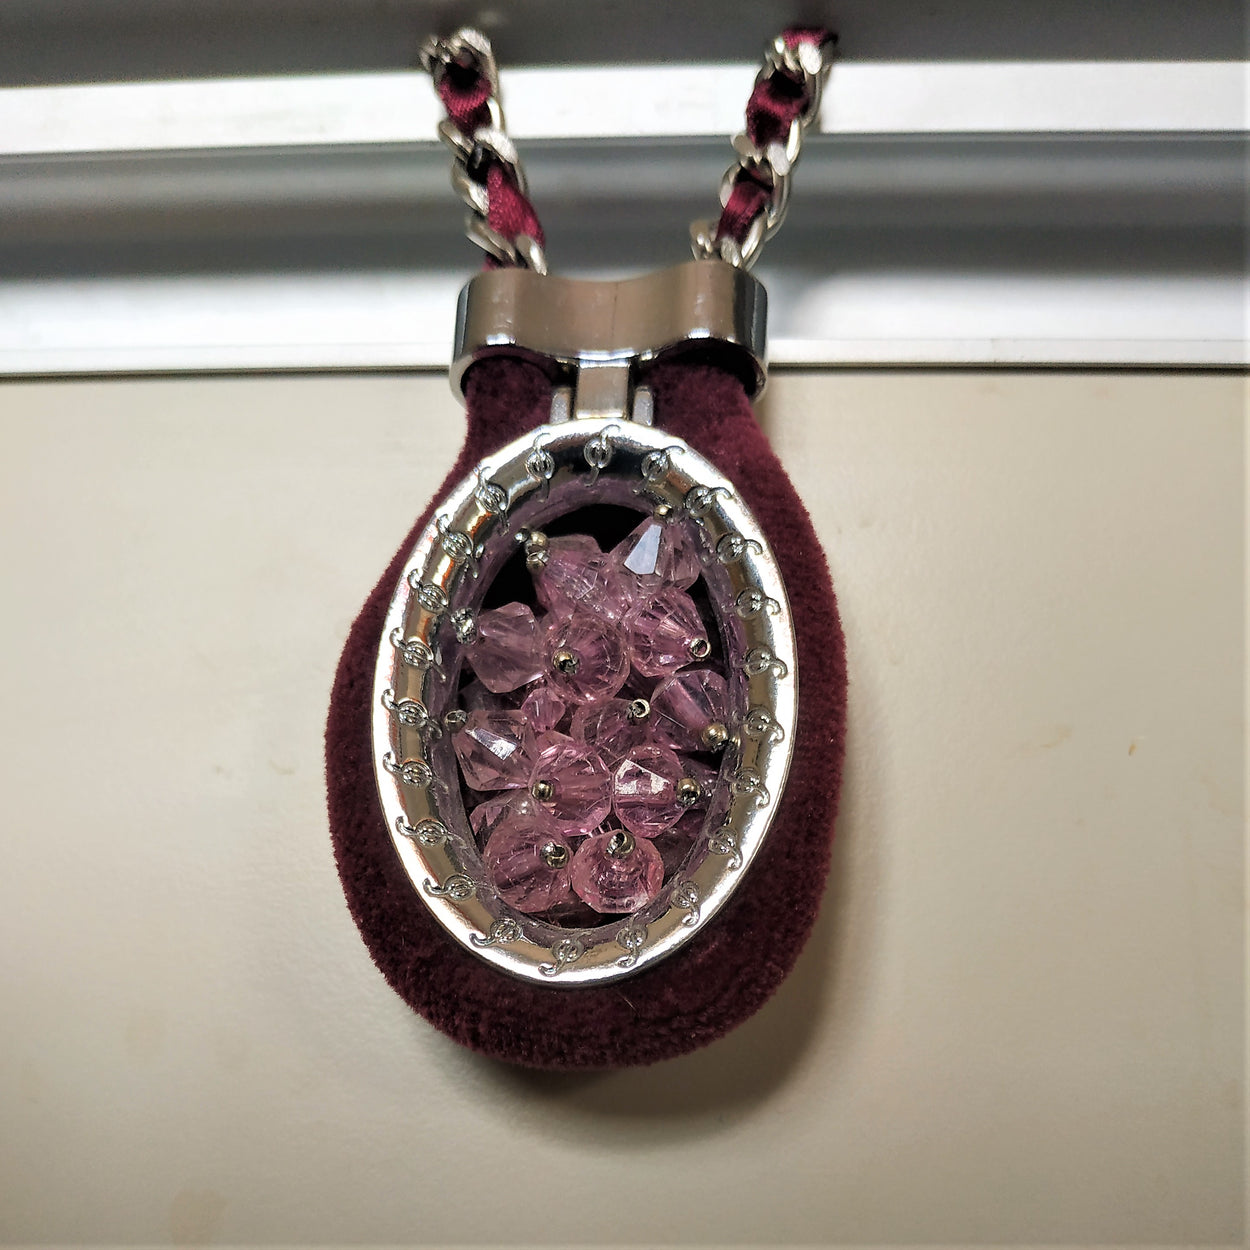 A massive shiny chain with a large wine-colored pendant